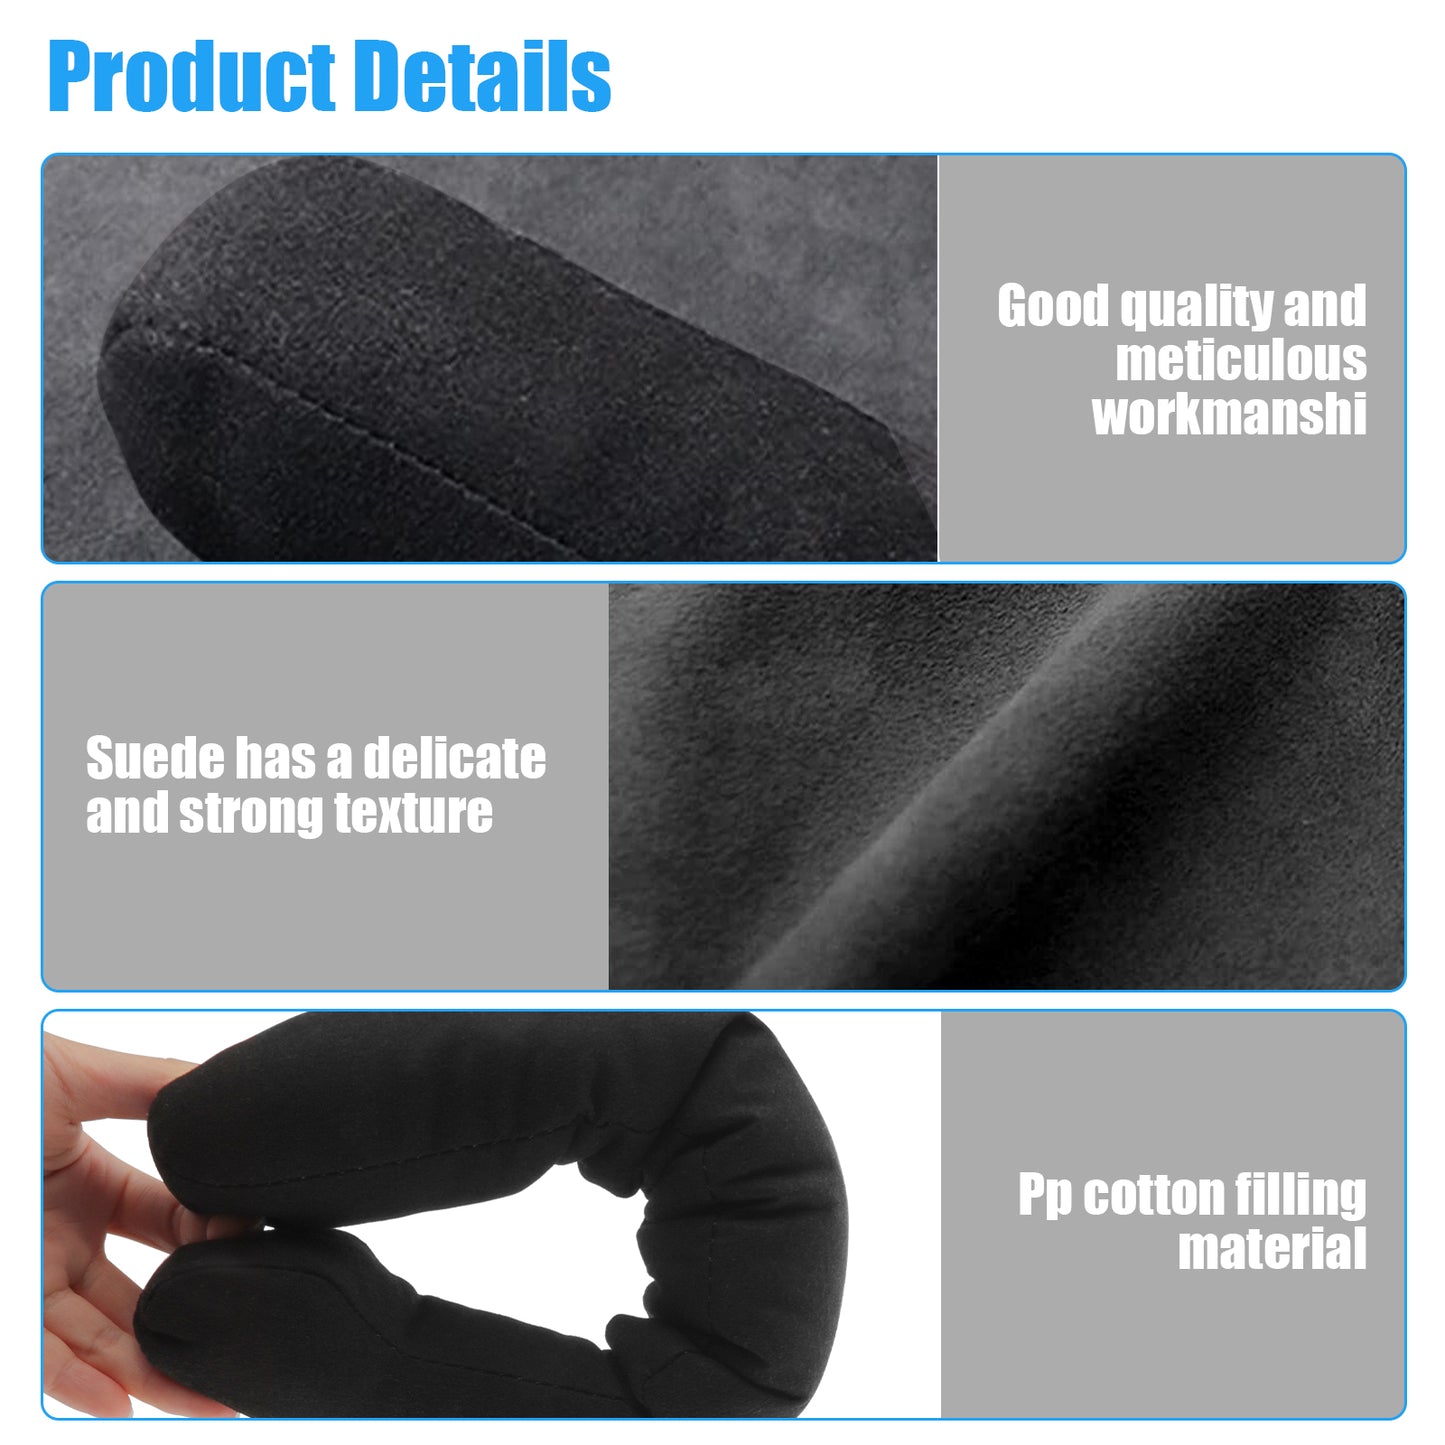 2 pcs Car Seat Gap Fillers - Prevent Items from Falling, Perfect Fit for trucks, cars, and vans, Easy to Clean and Use